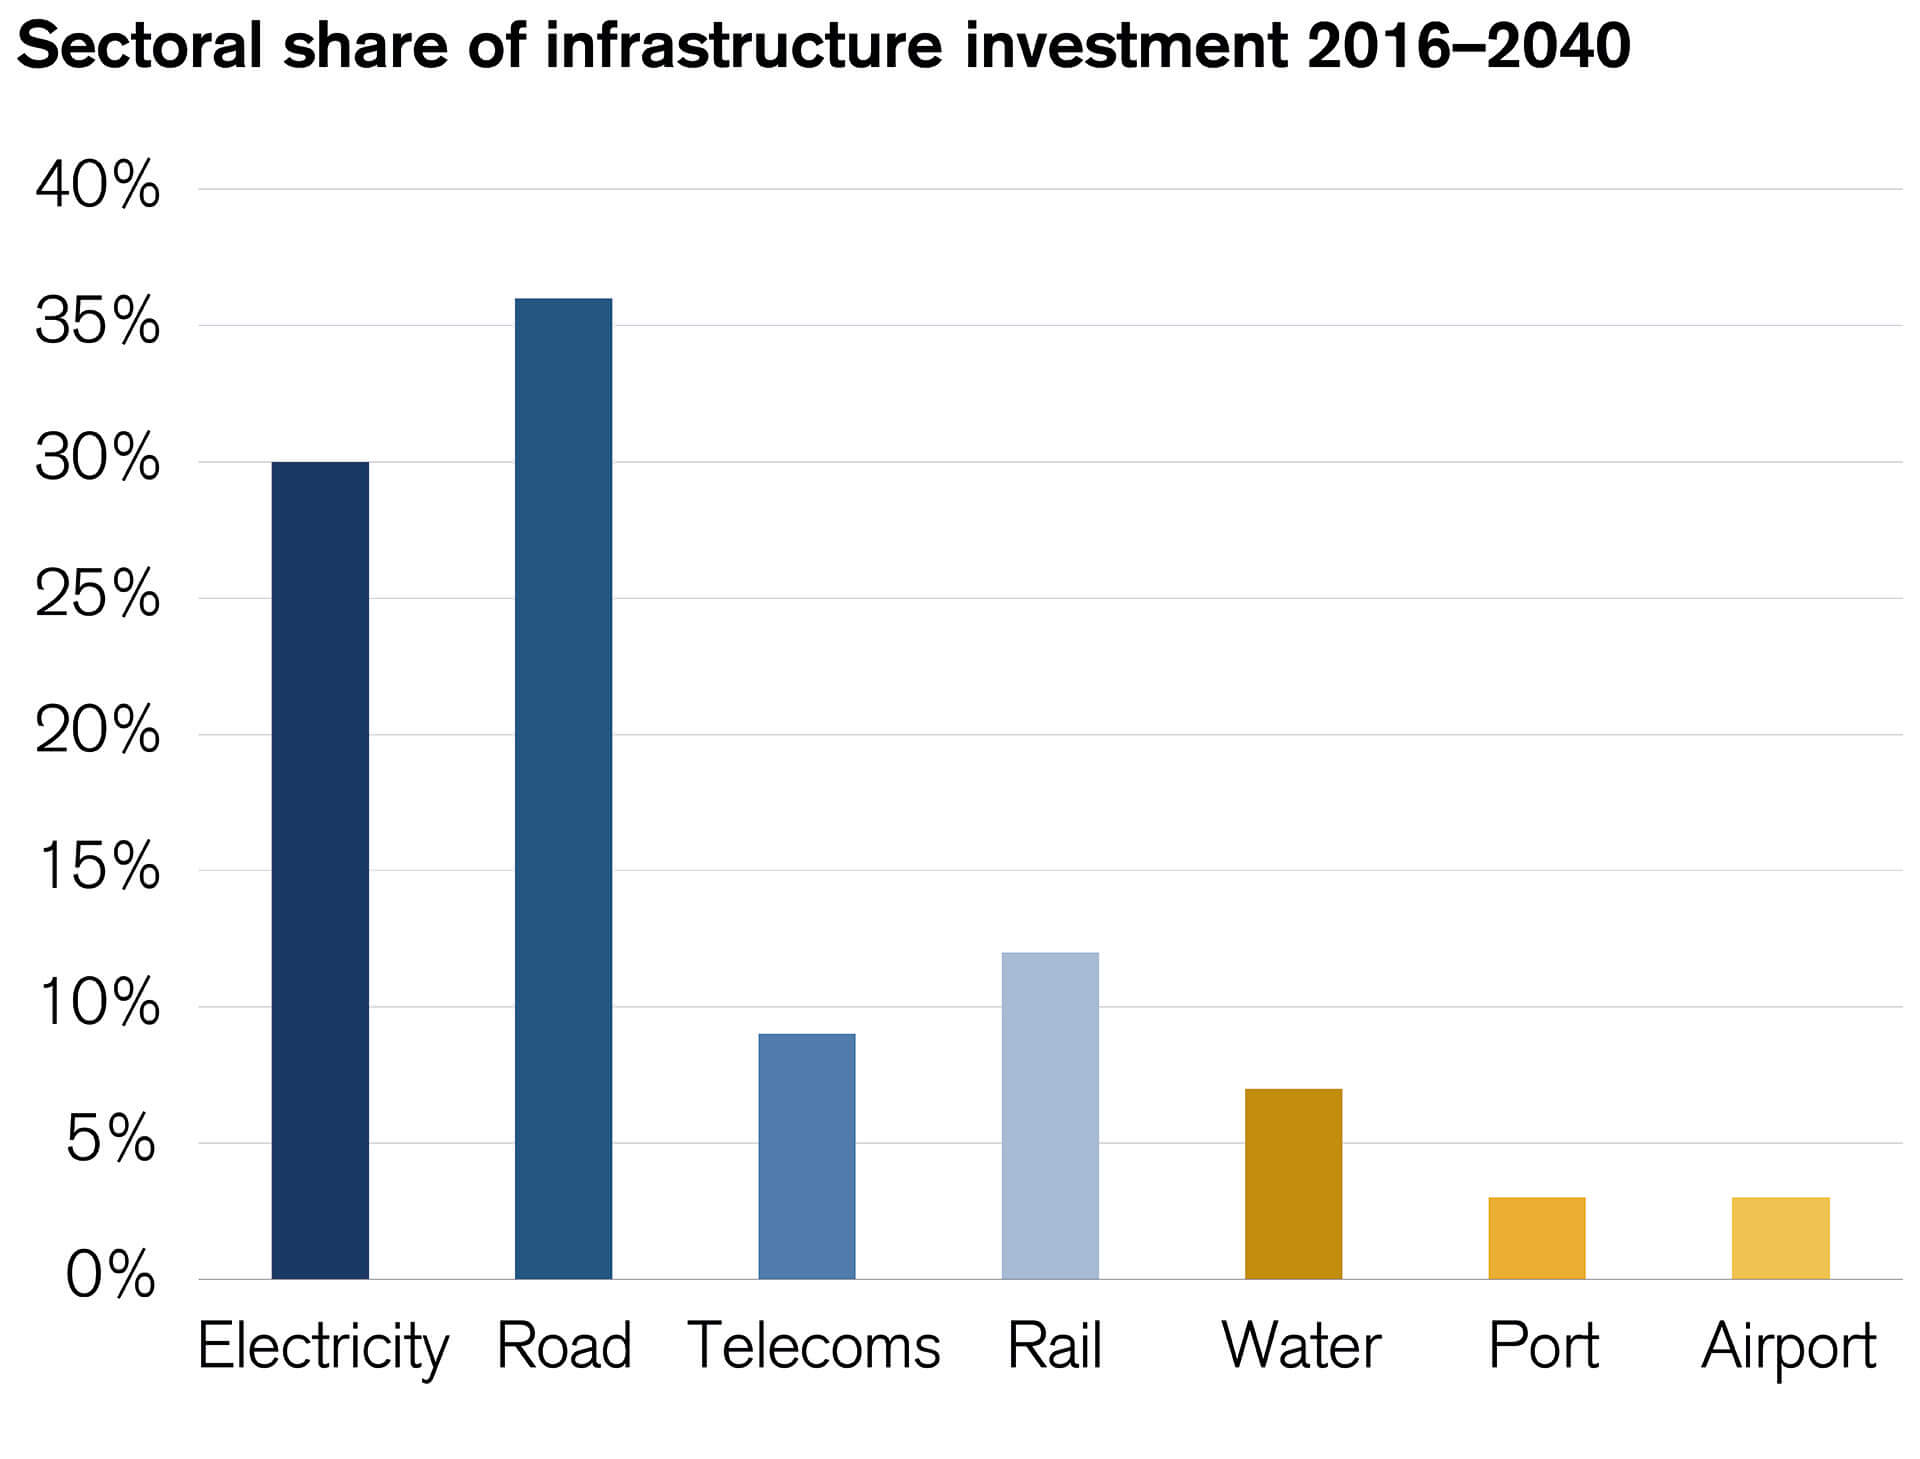 Vertical bar chart showing the sectoral share of infrastructure investment in the years 2016-2040.